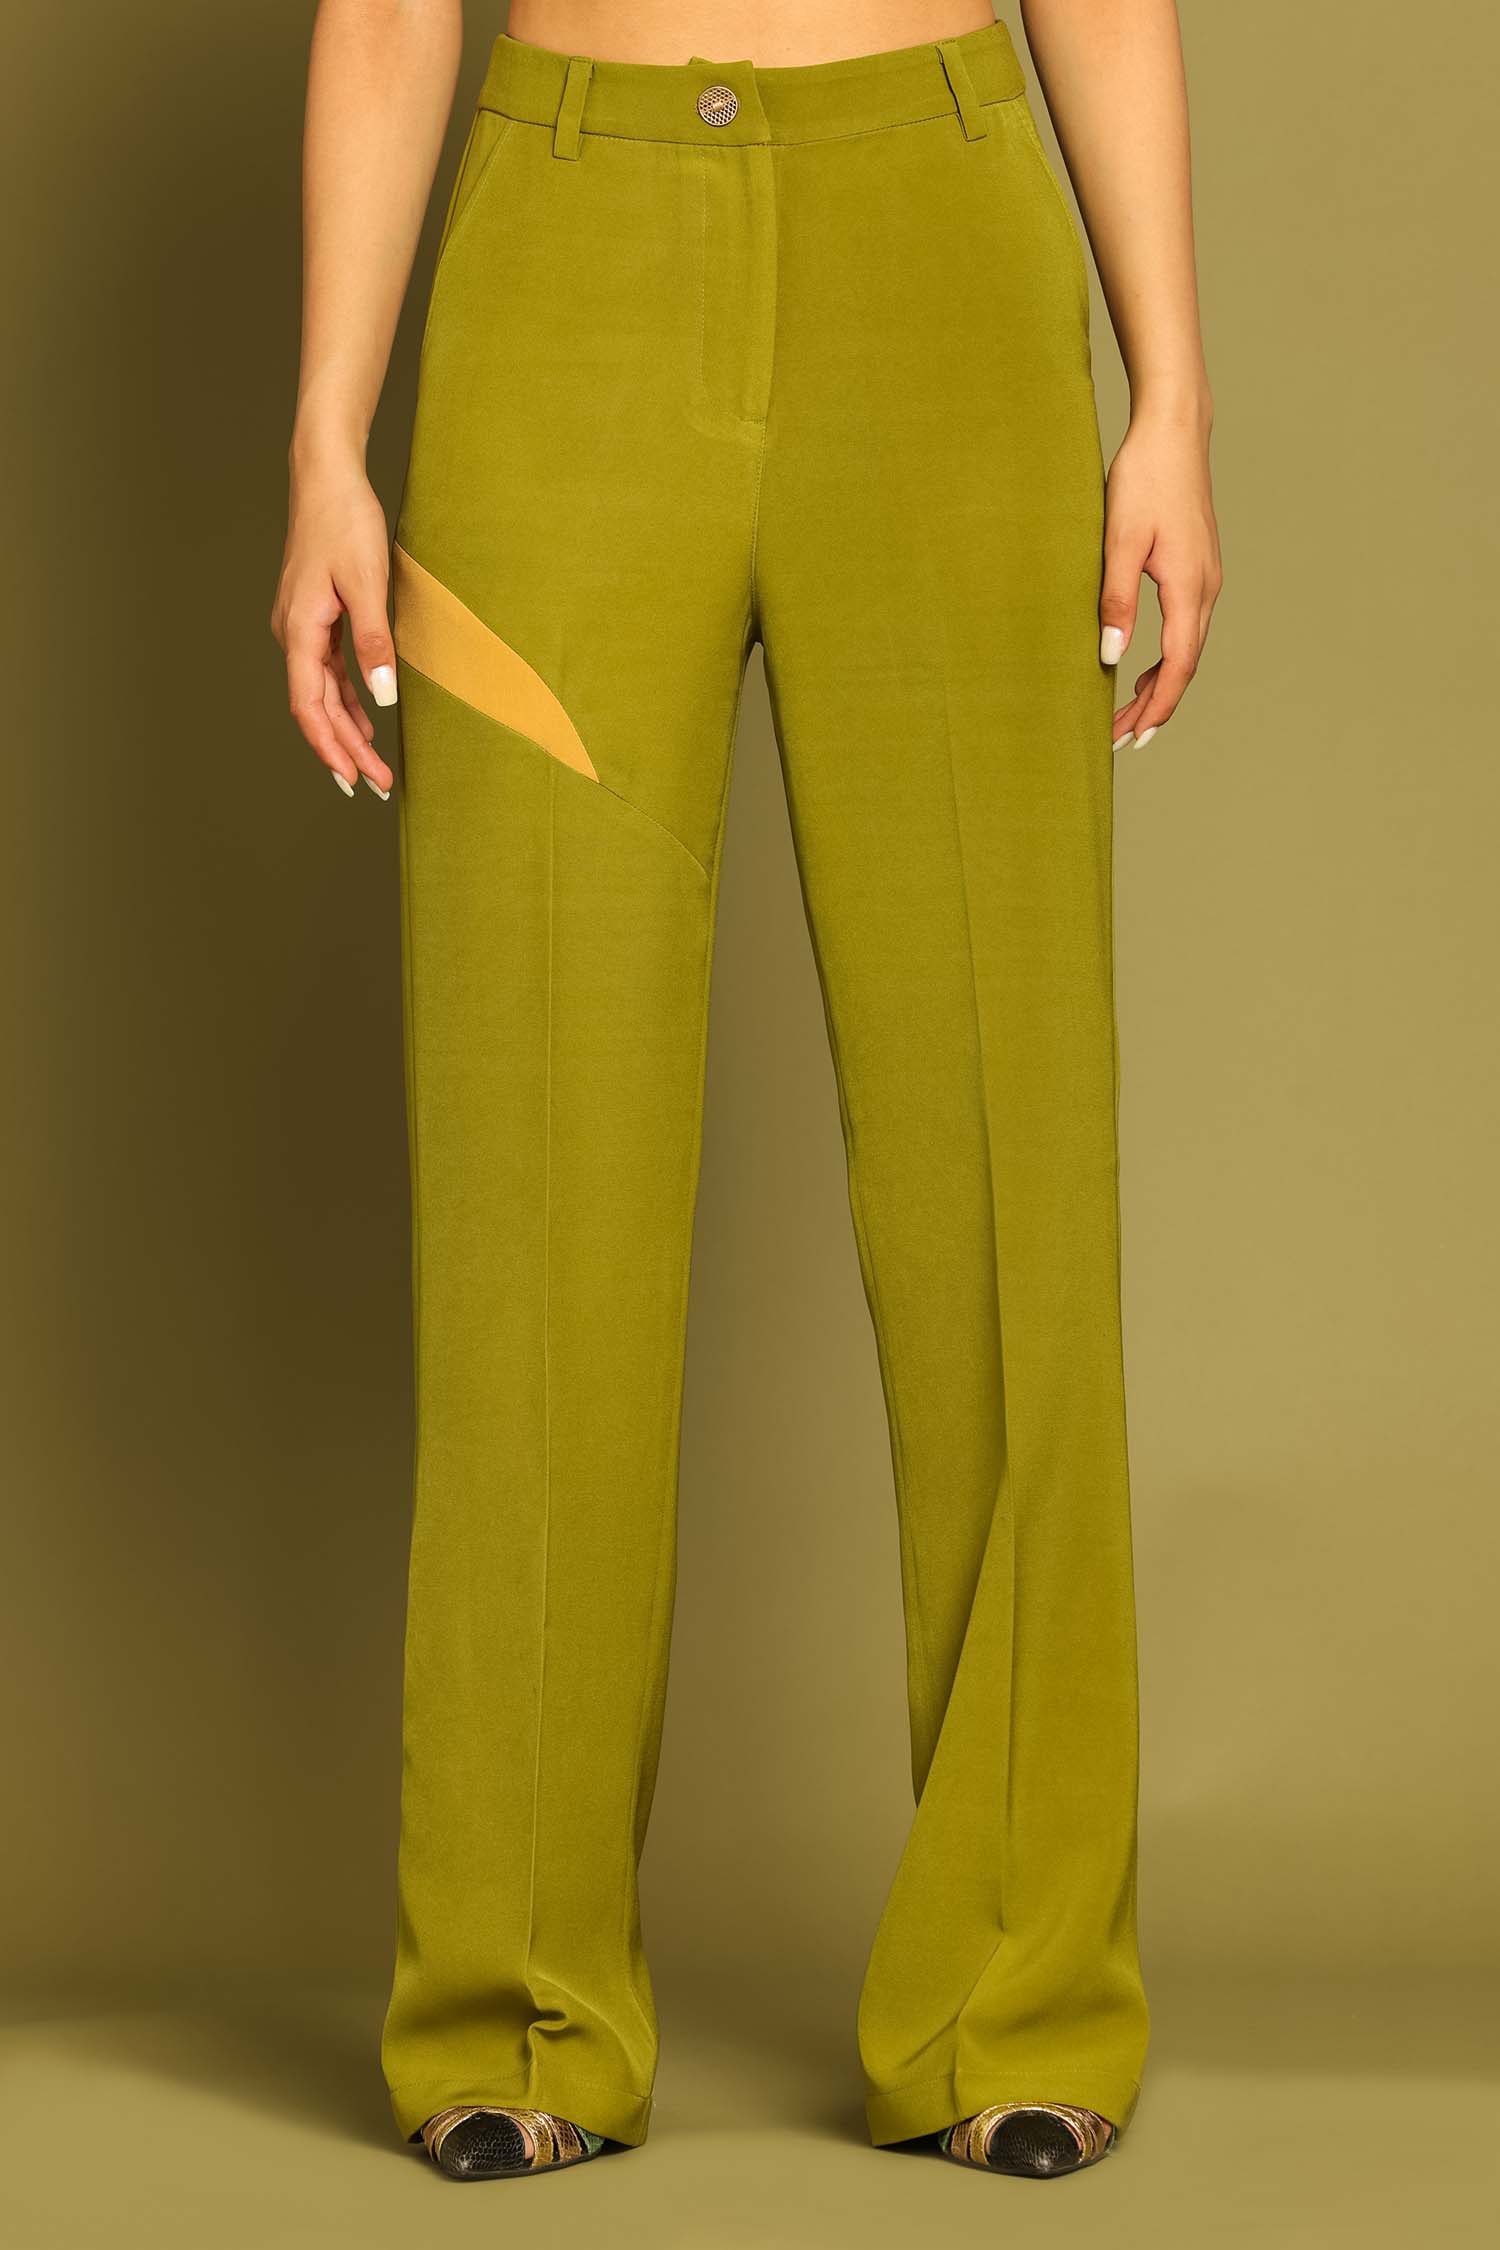 Olive Green Zip Up Flare Trousers